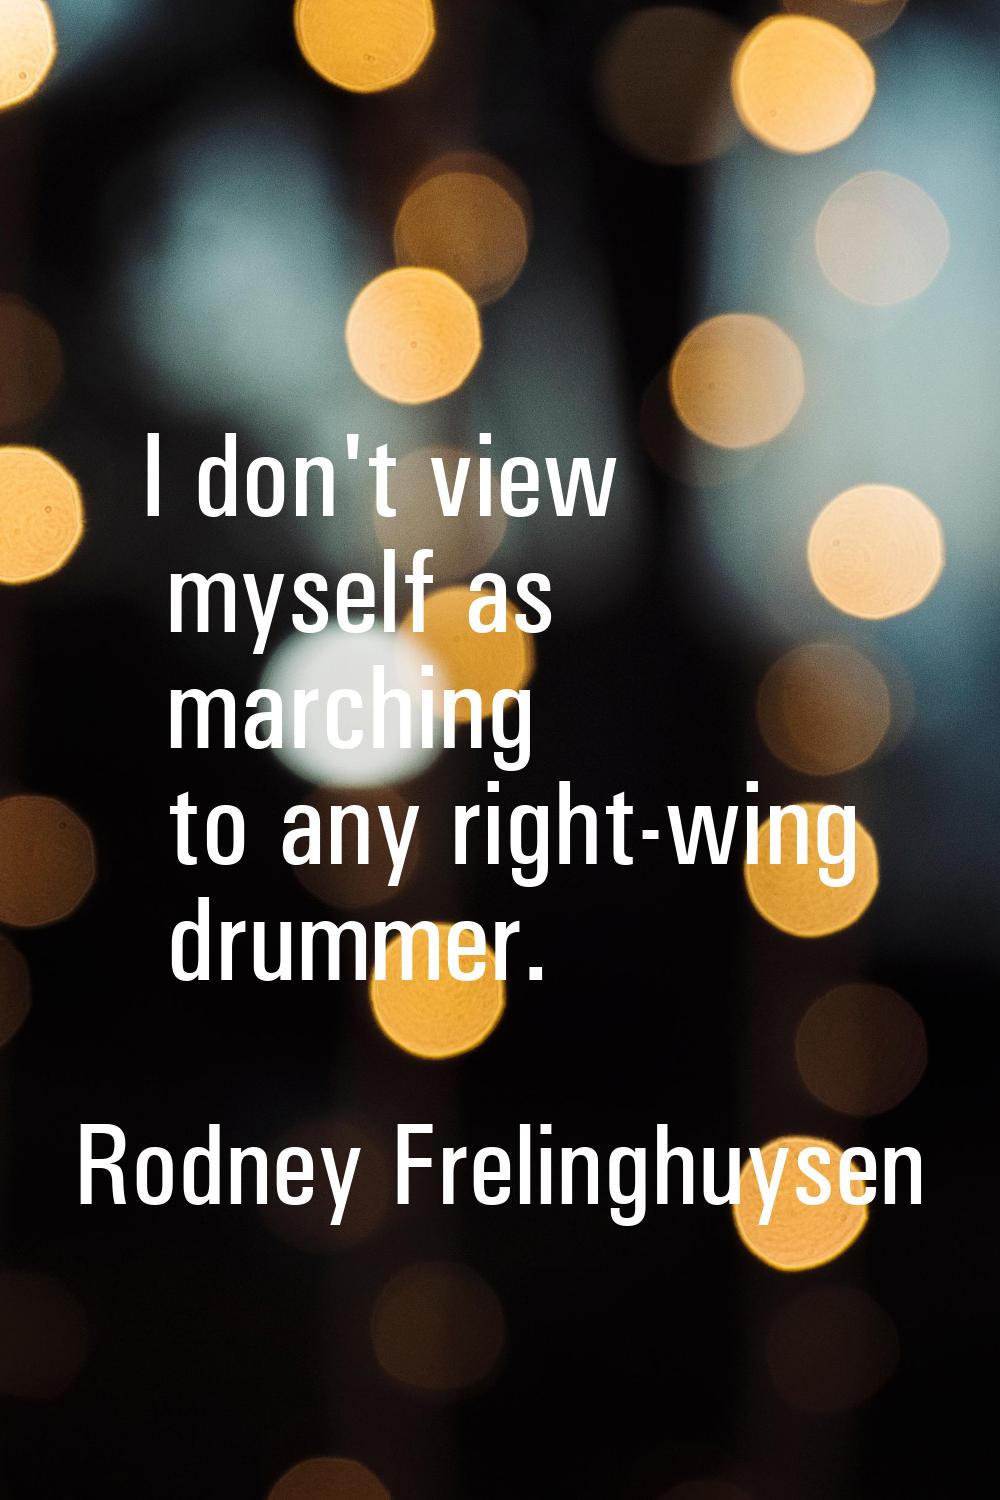 I don't view myself as marching to any right-wing drummer.